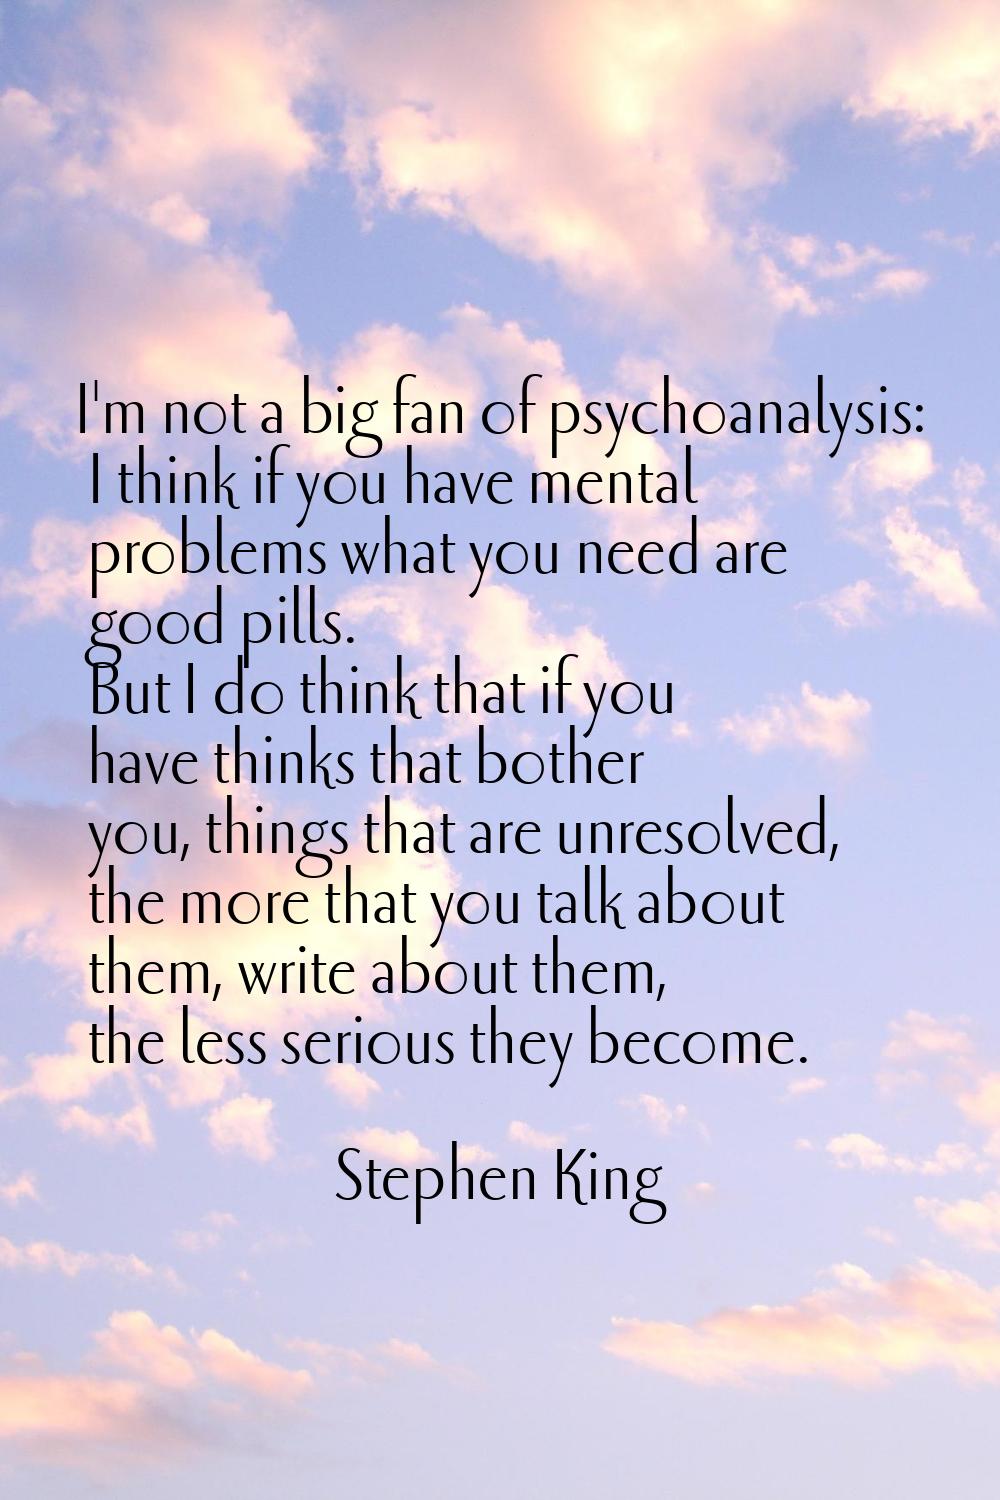 I'm not a big fan of psychoanalysis: I think if you have mental problems what you need are good pil